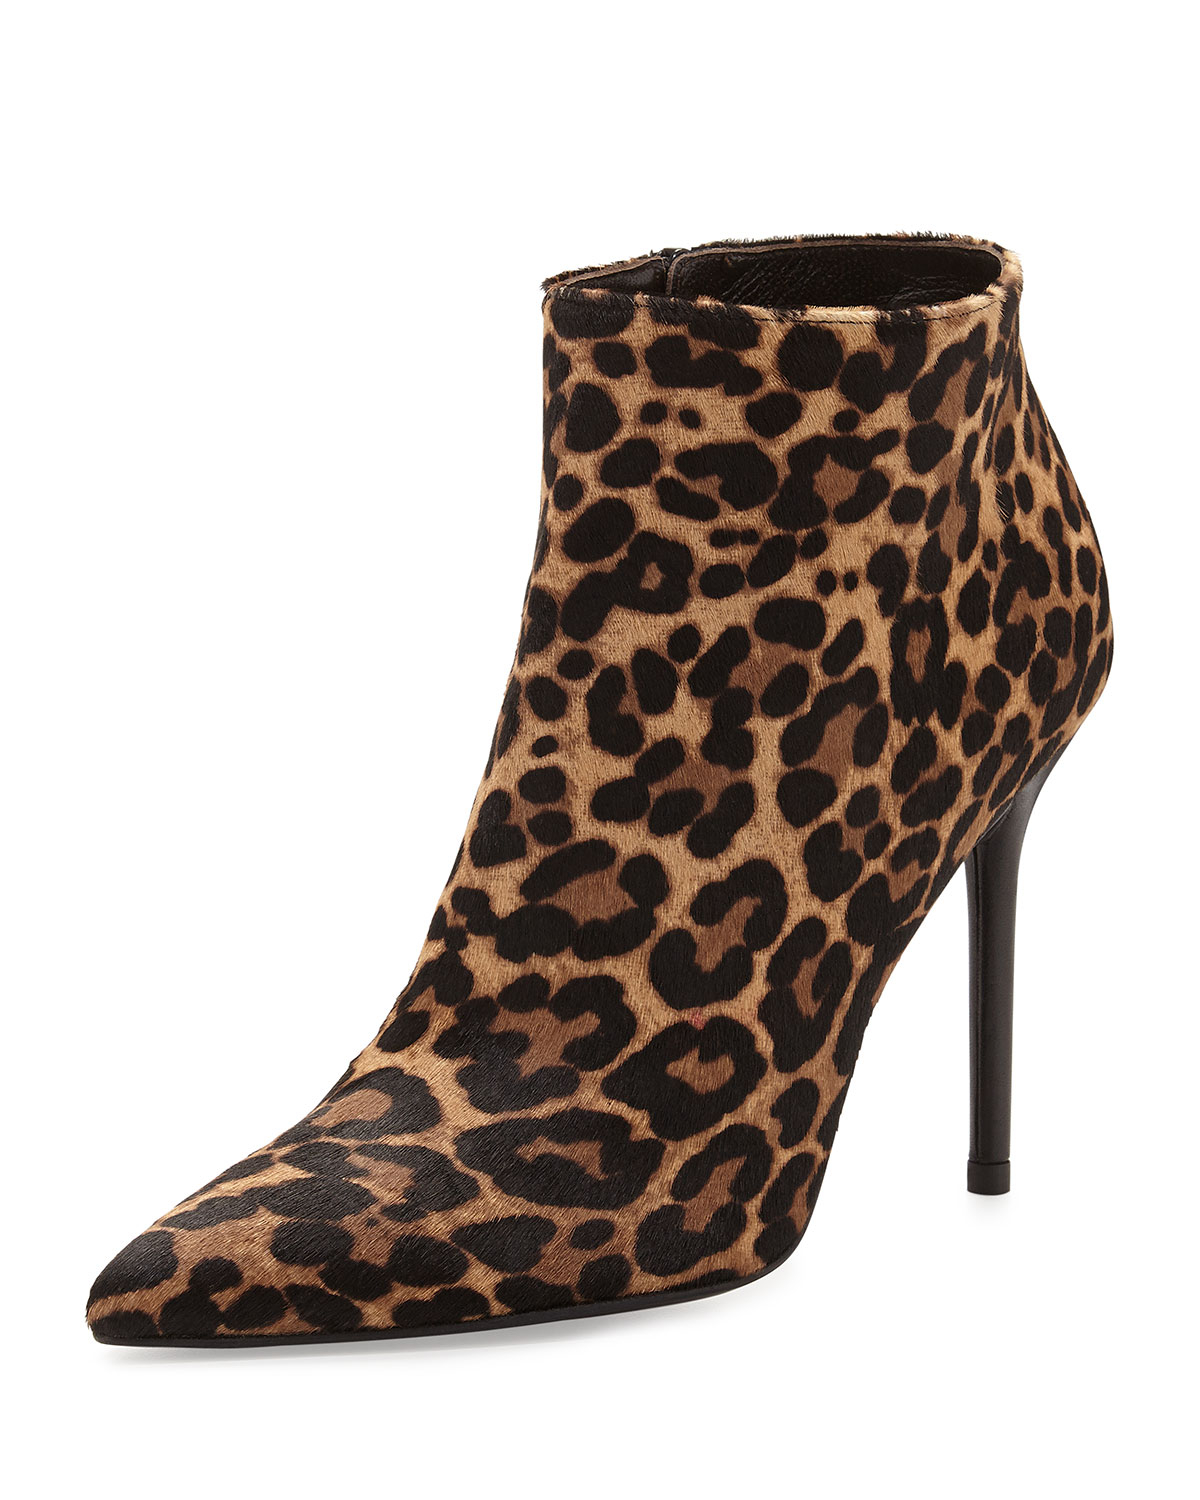 Lyst - Stuart Weitzman Hitimes Leopard-Print Calf-Hair Ankle Boots in Brown